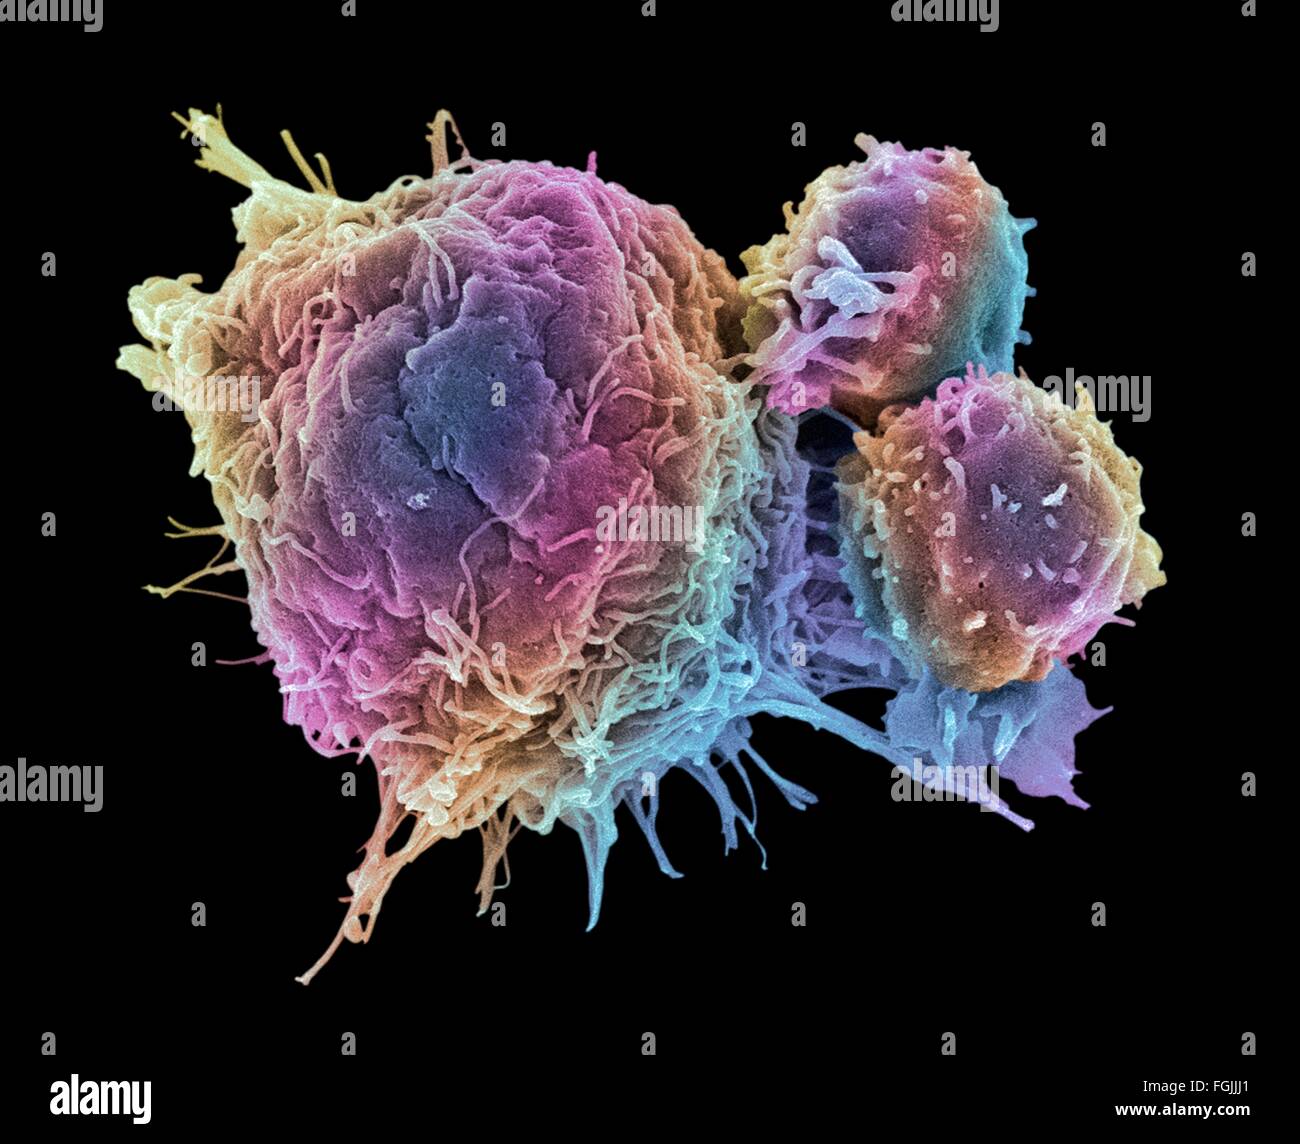 T lymphocytes and cancer cell. Coloured scanning electron micrograph (SEM) of T lymphocyte cells (smaller round cells) attached Stock Photo